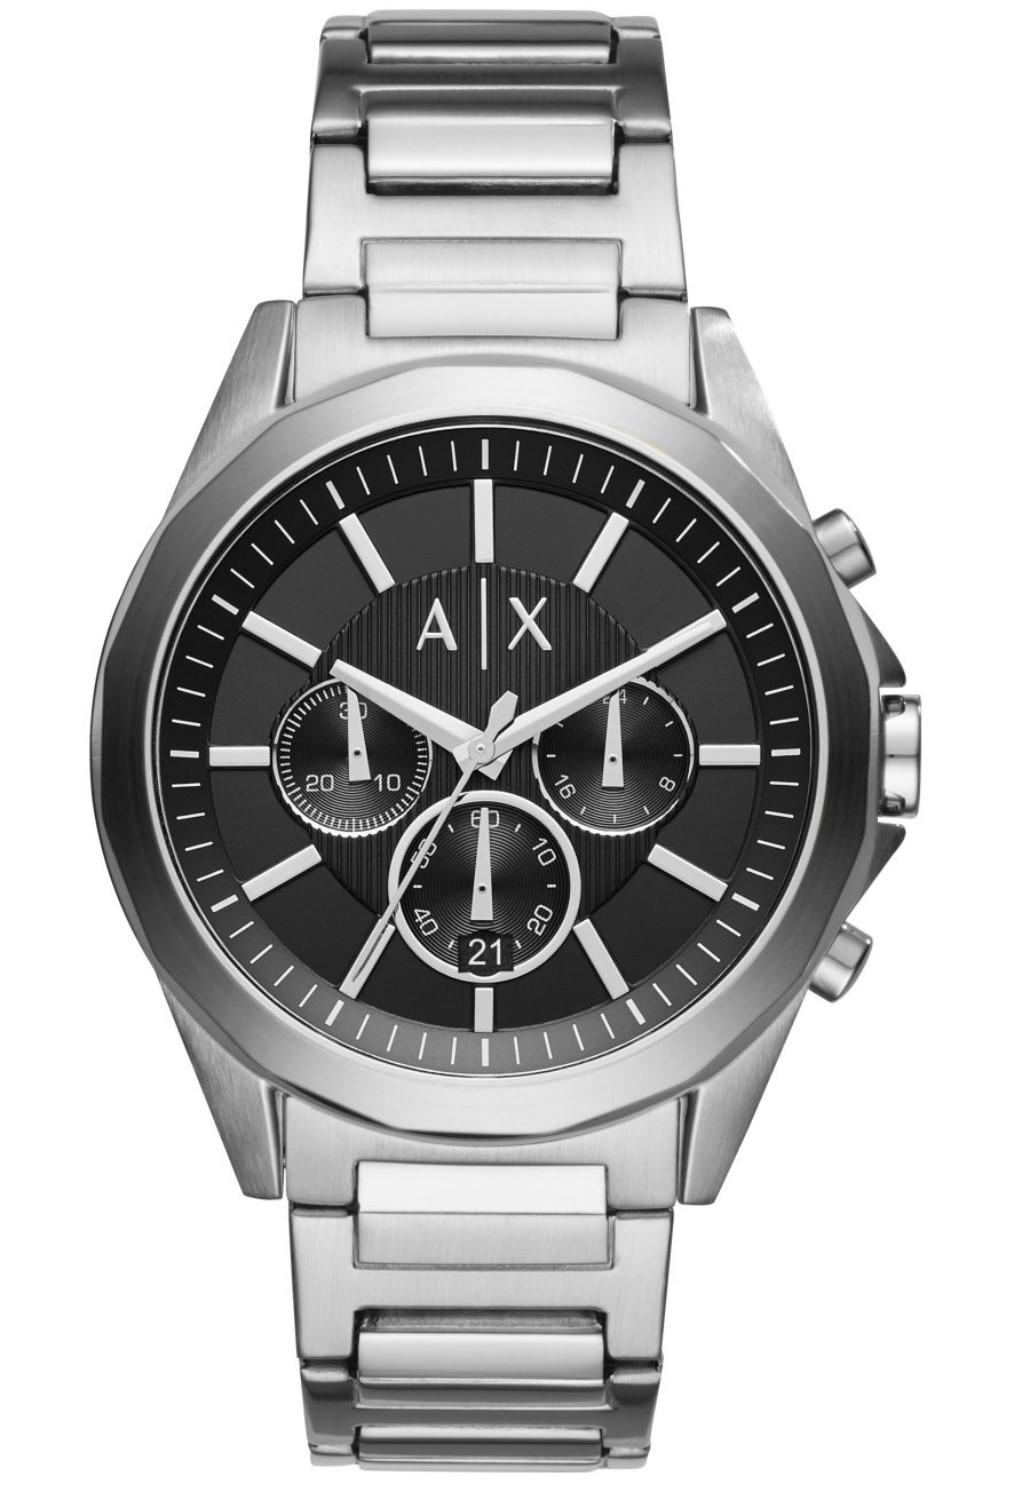 ARMANI EXCHANGE Drexler Chronograph - AX2600, Silver case with Stainless Steel Bracelet